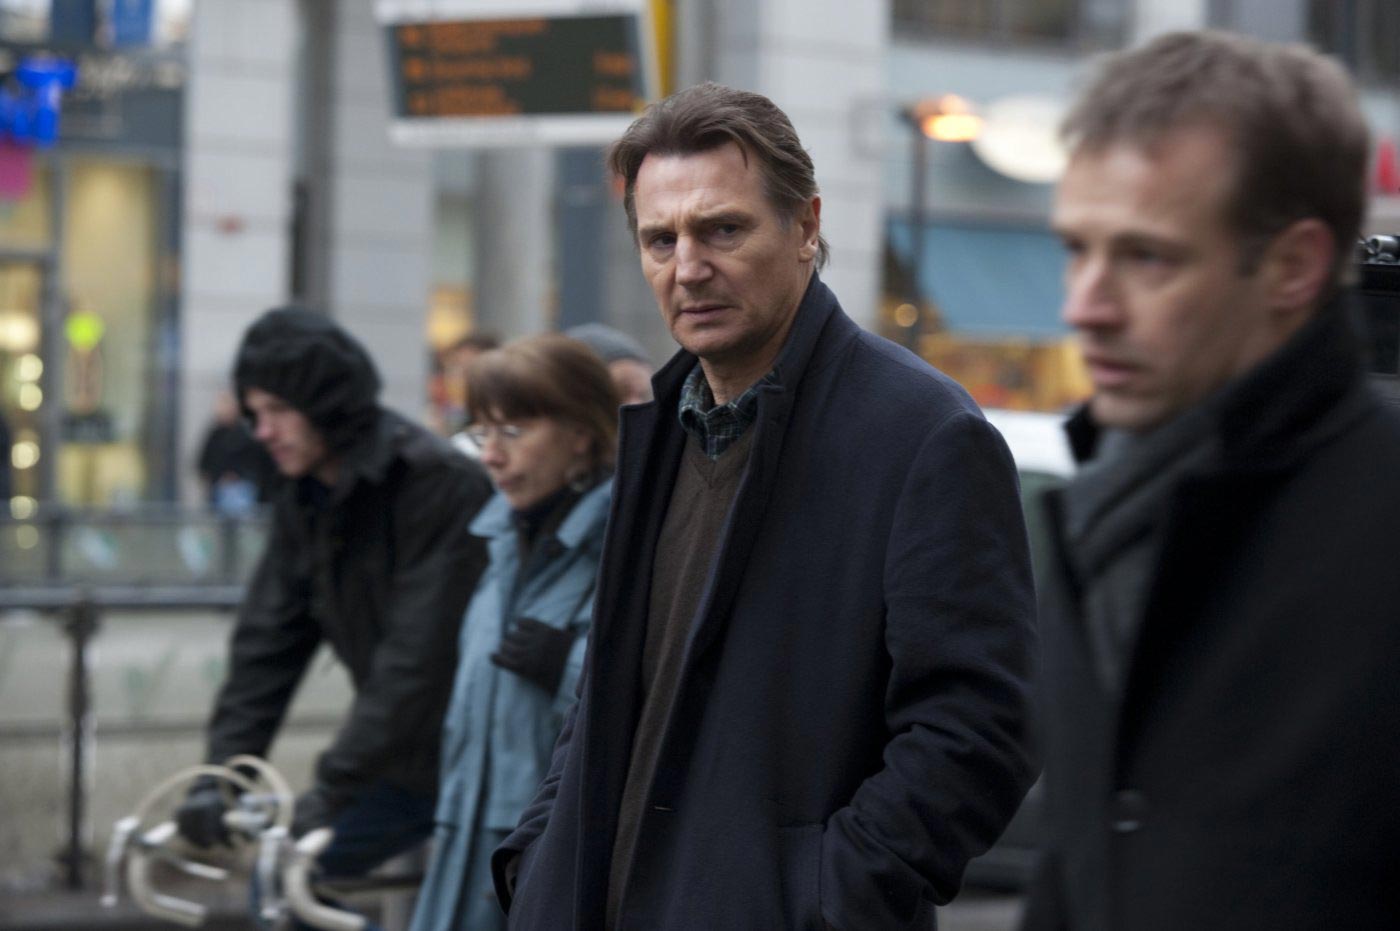 Liam Neeson as Dr. Martin Harris in Unknown